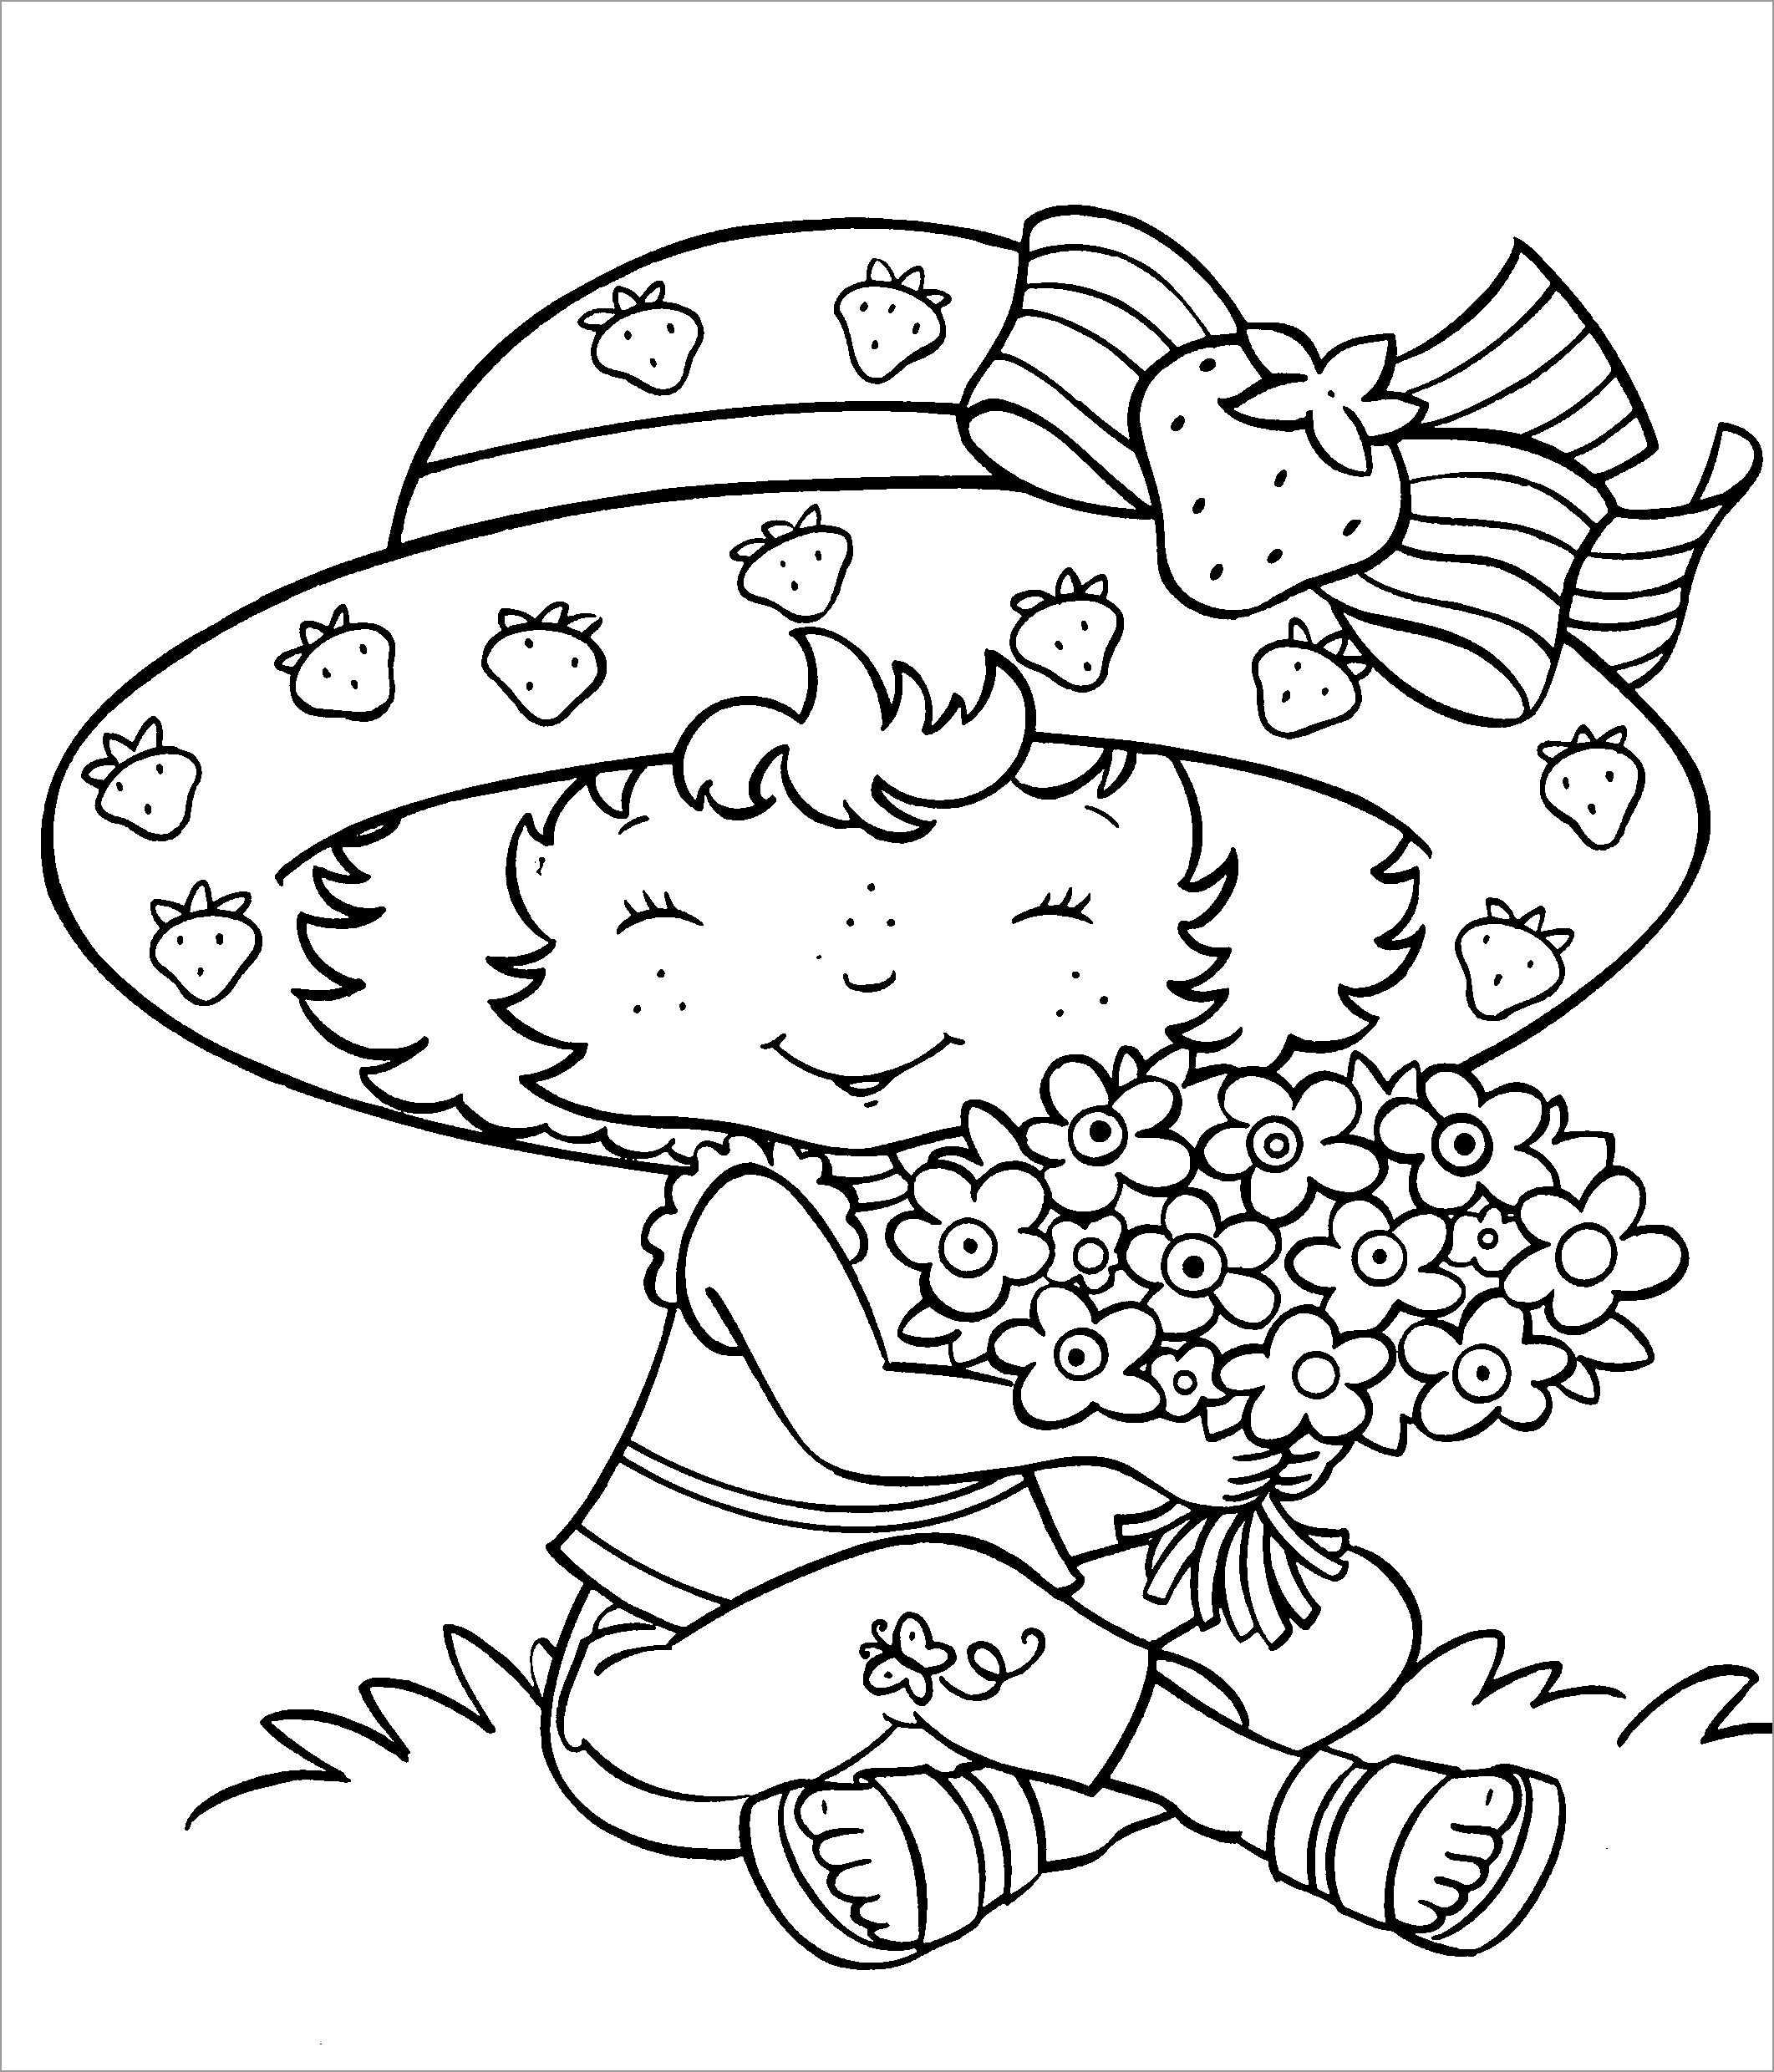 Strawberry Shortcake Girl Coloring Pages